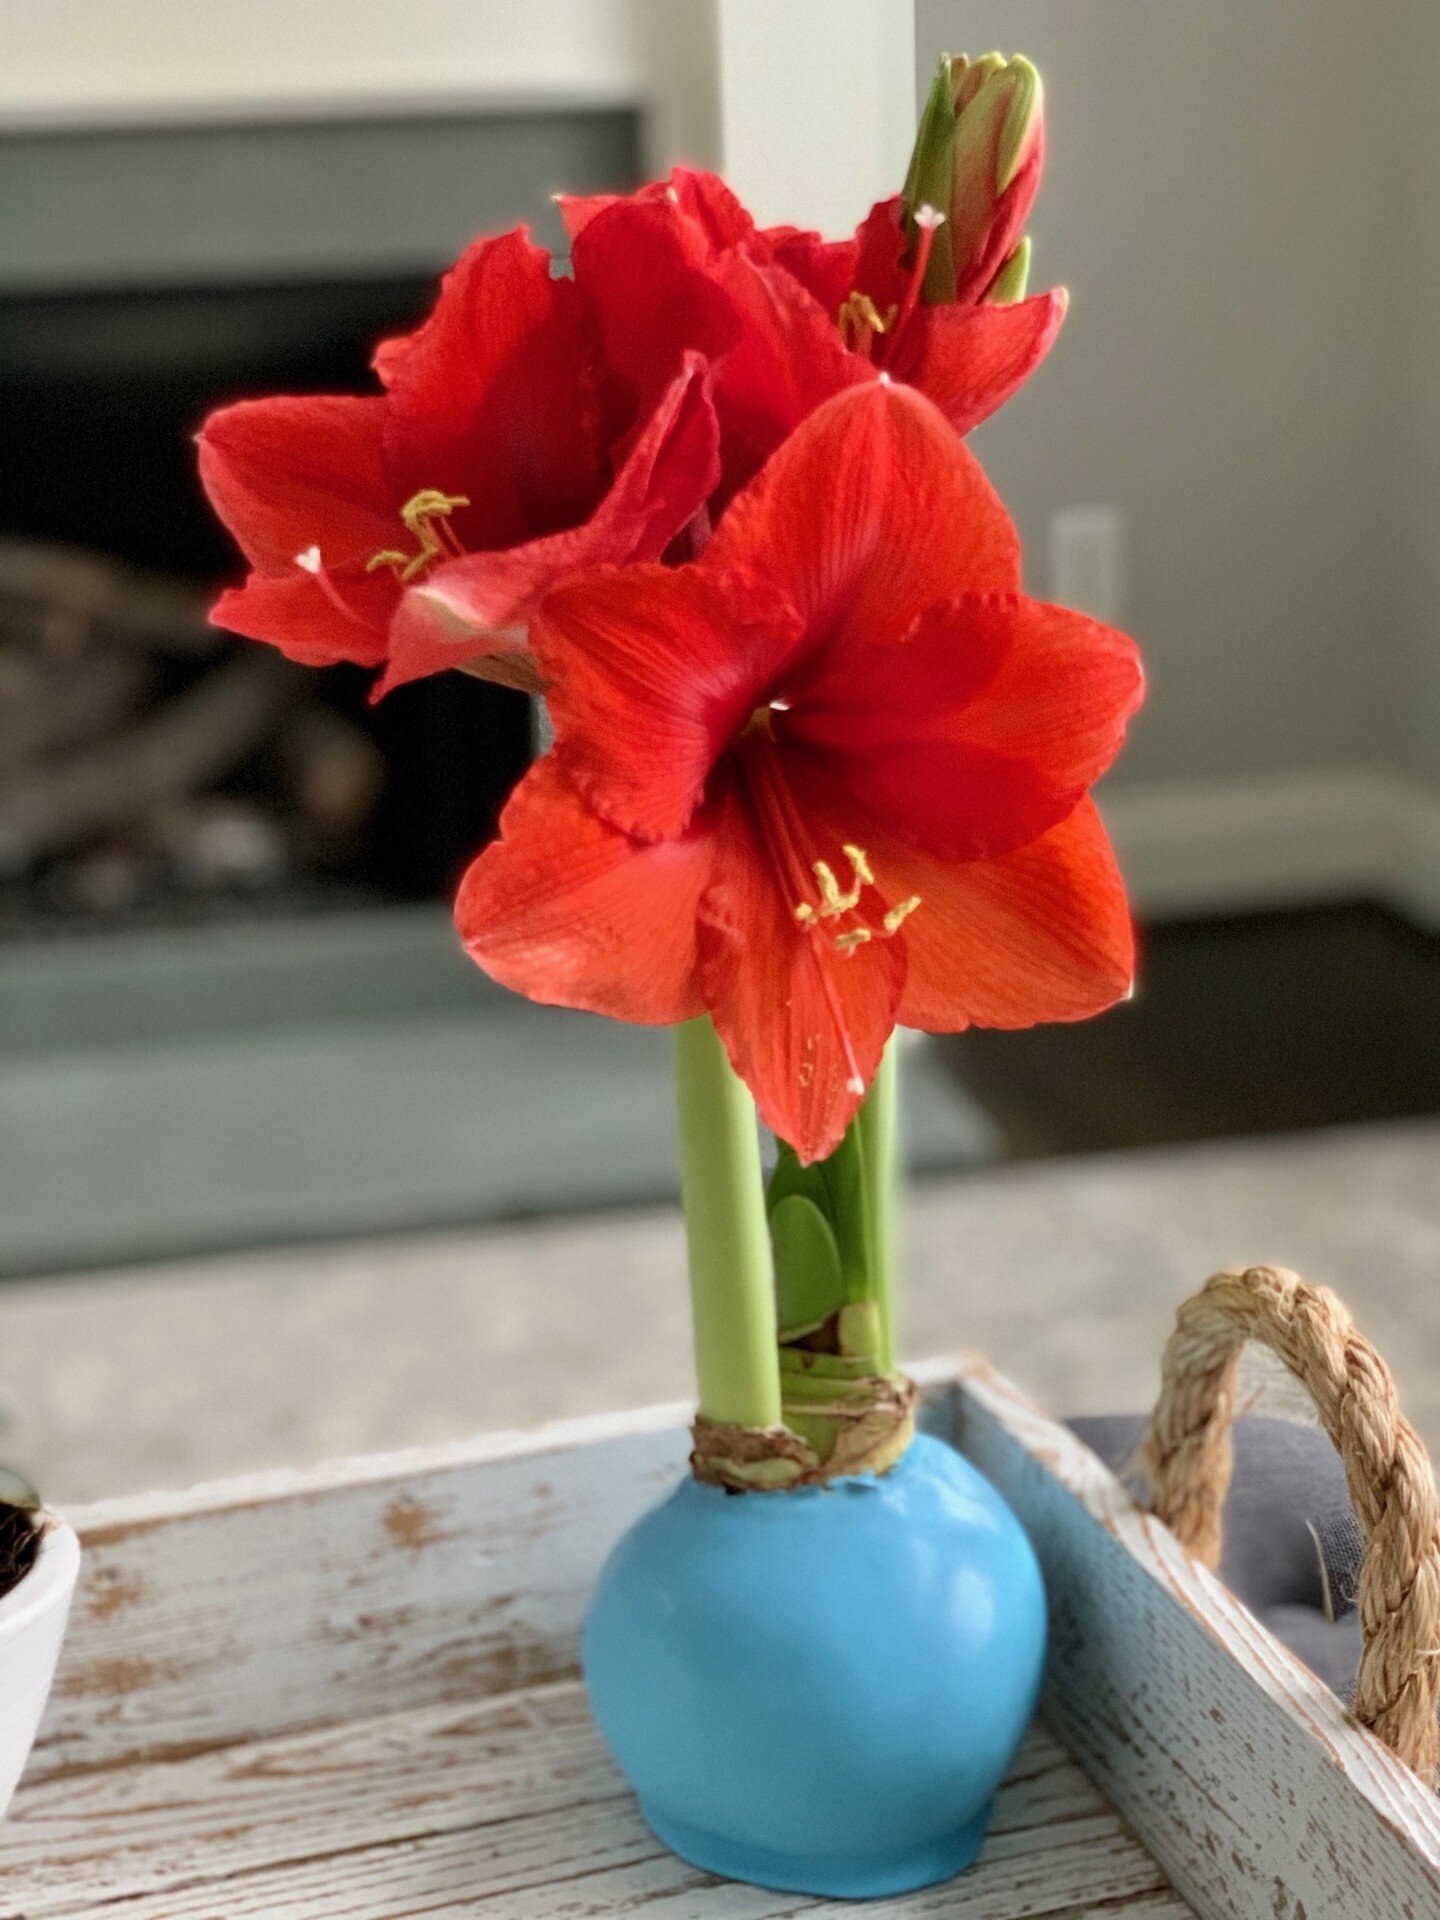 Did you know that the word Amaryllis comes from the Greek word, &quot;Amarysso&quot; which means &quot;to sparkle&quot; ✨ We hope your spring time Amaryllis are coming into full bloom and bring a little sparkle to your home this season 💐🌸🌺
www.blo